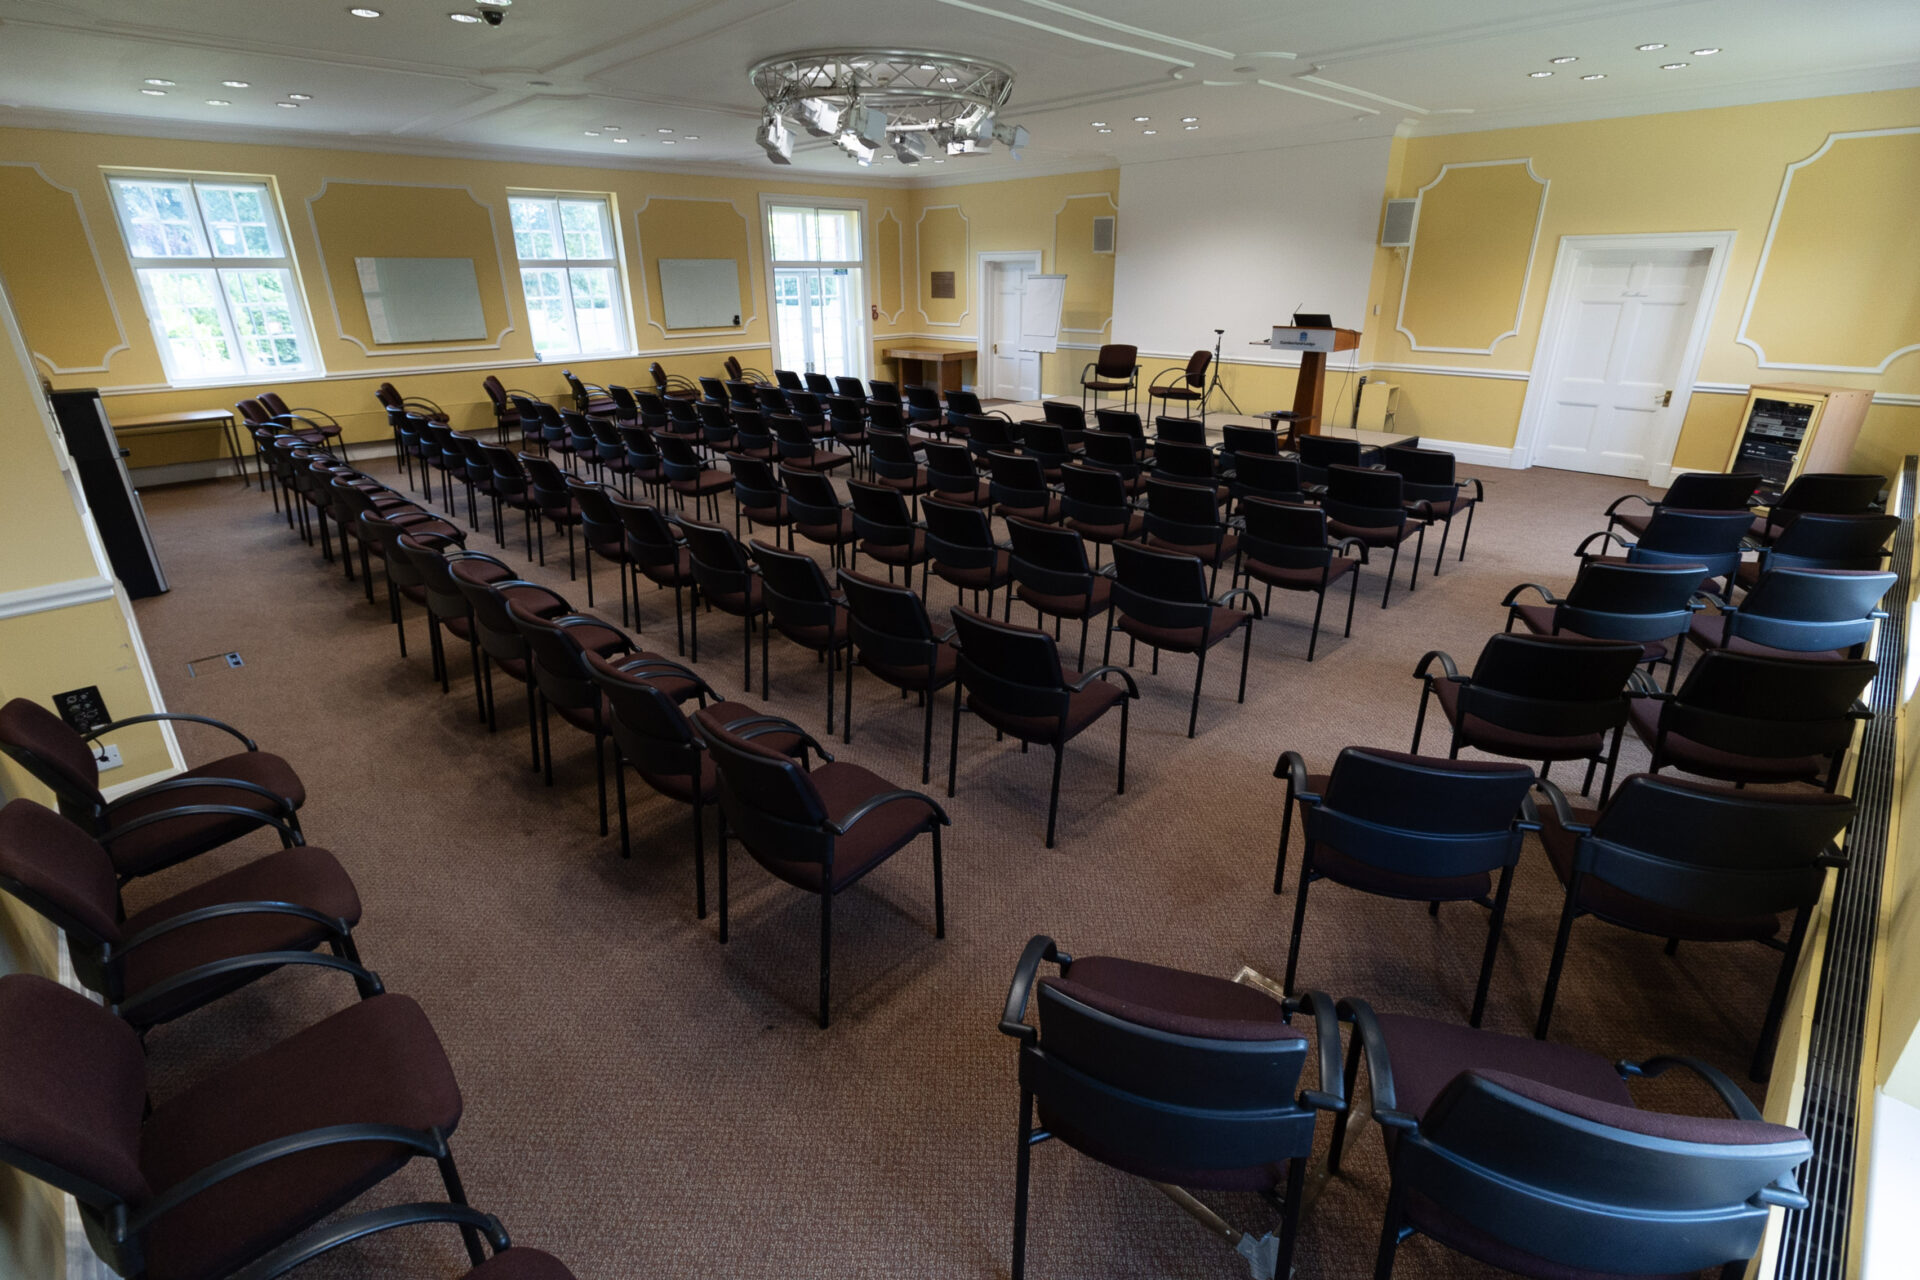 The Flitcroft conference room, set up to accommodate up to 100 people in a theatre layout.